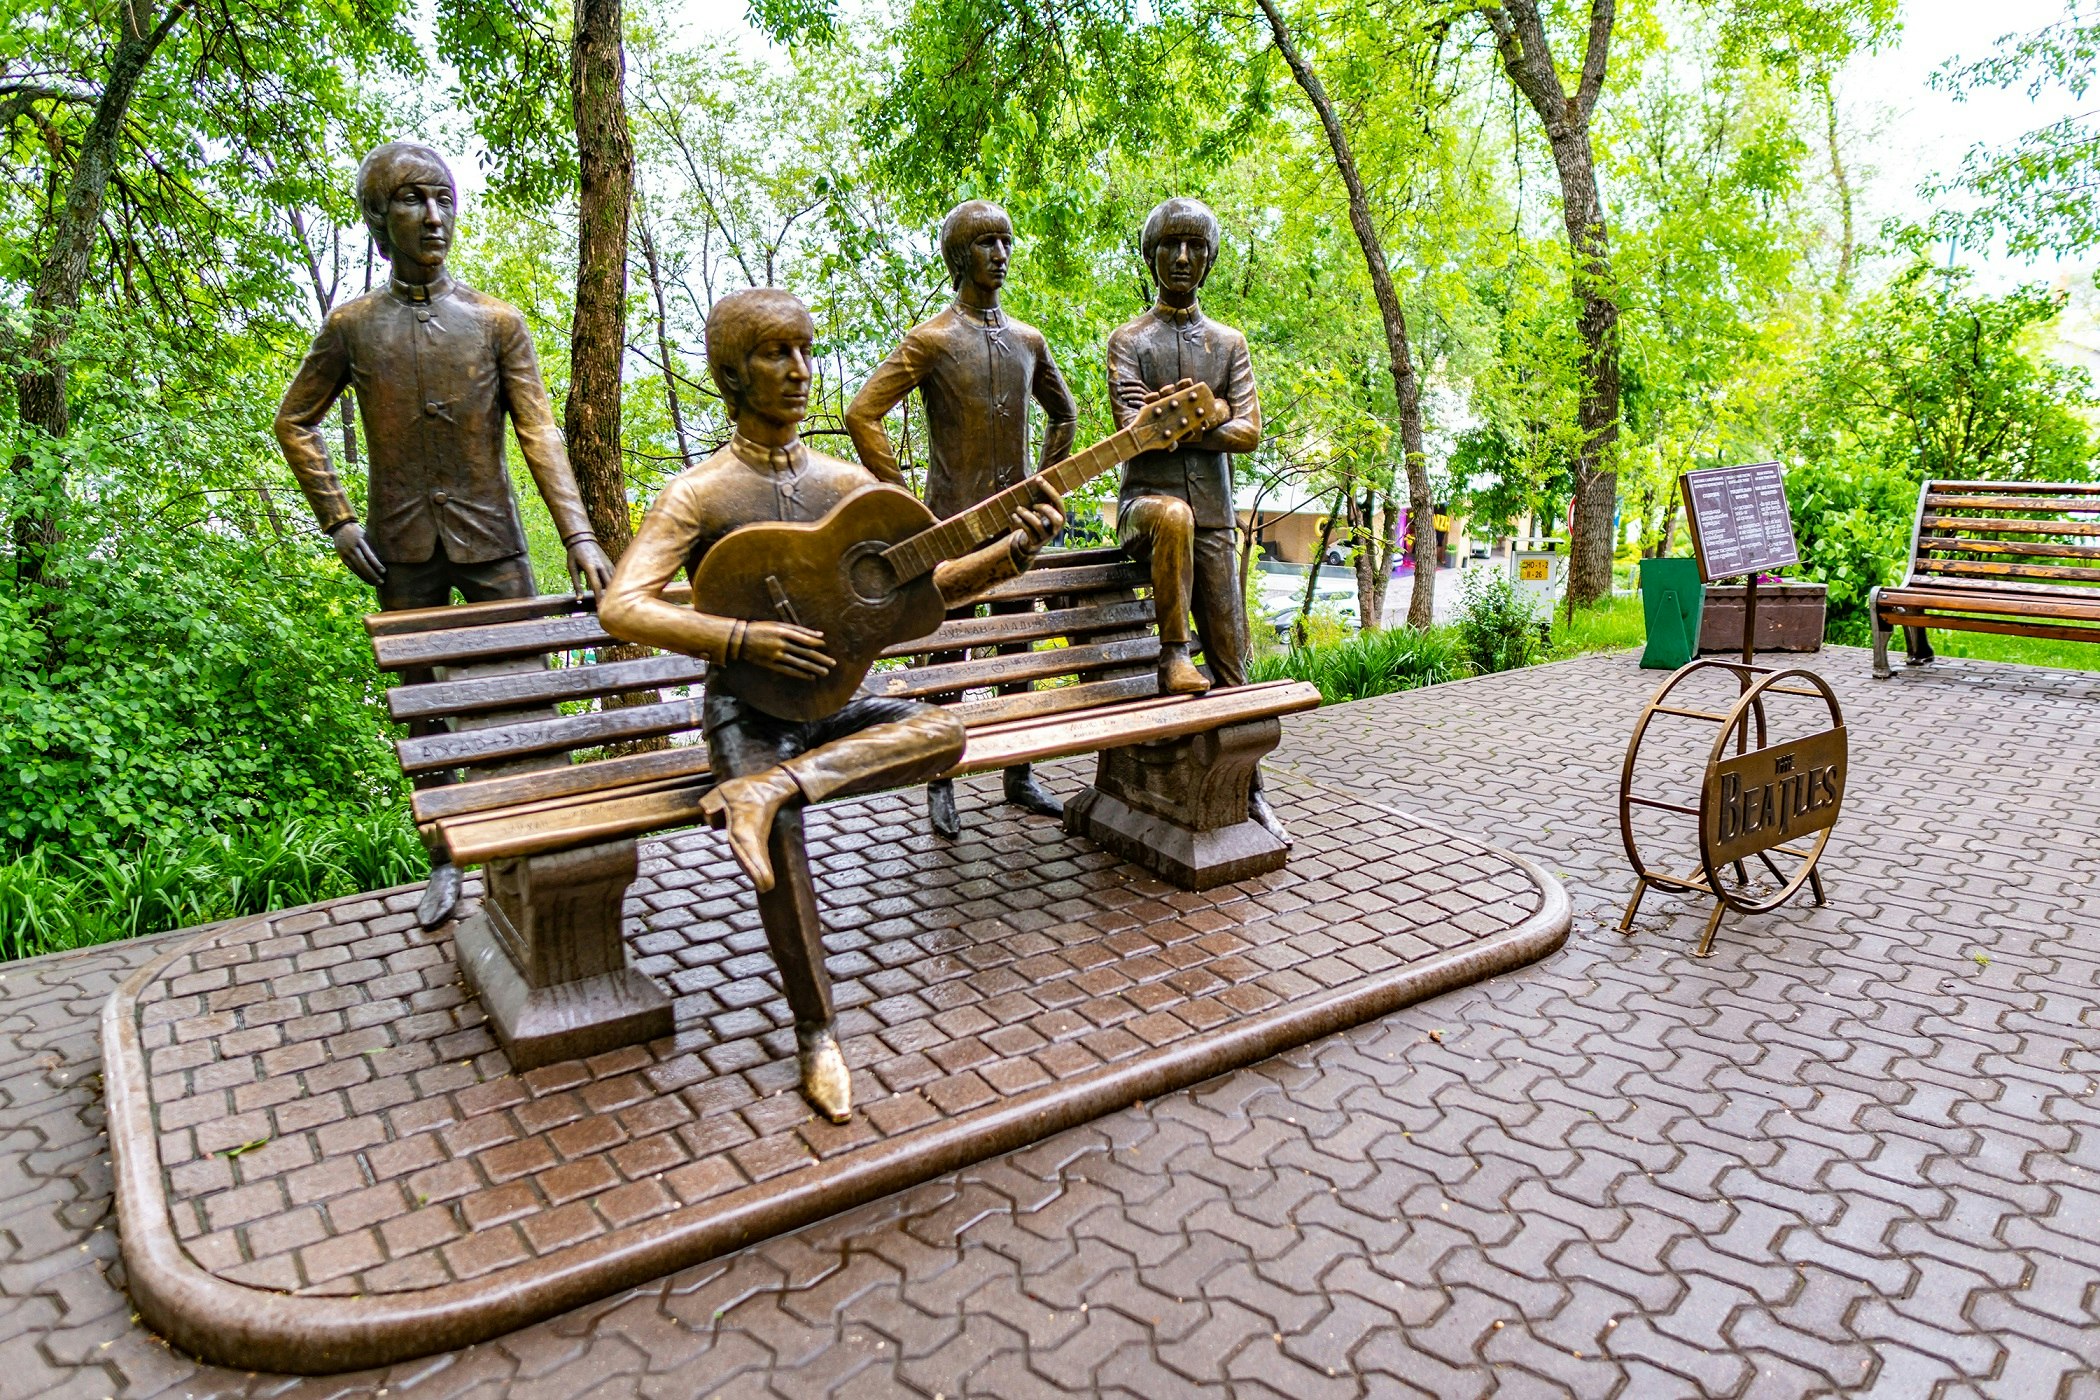 A bronze statue of British rock band The Beatles in Kok Tobe's hilltop amusement park. The four members of the band are life size, and sat on and stood around a bench.